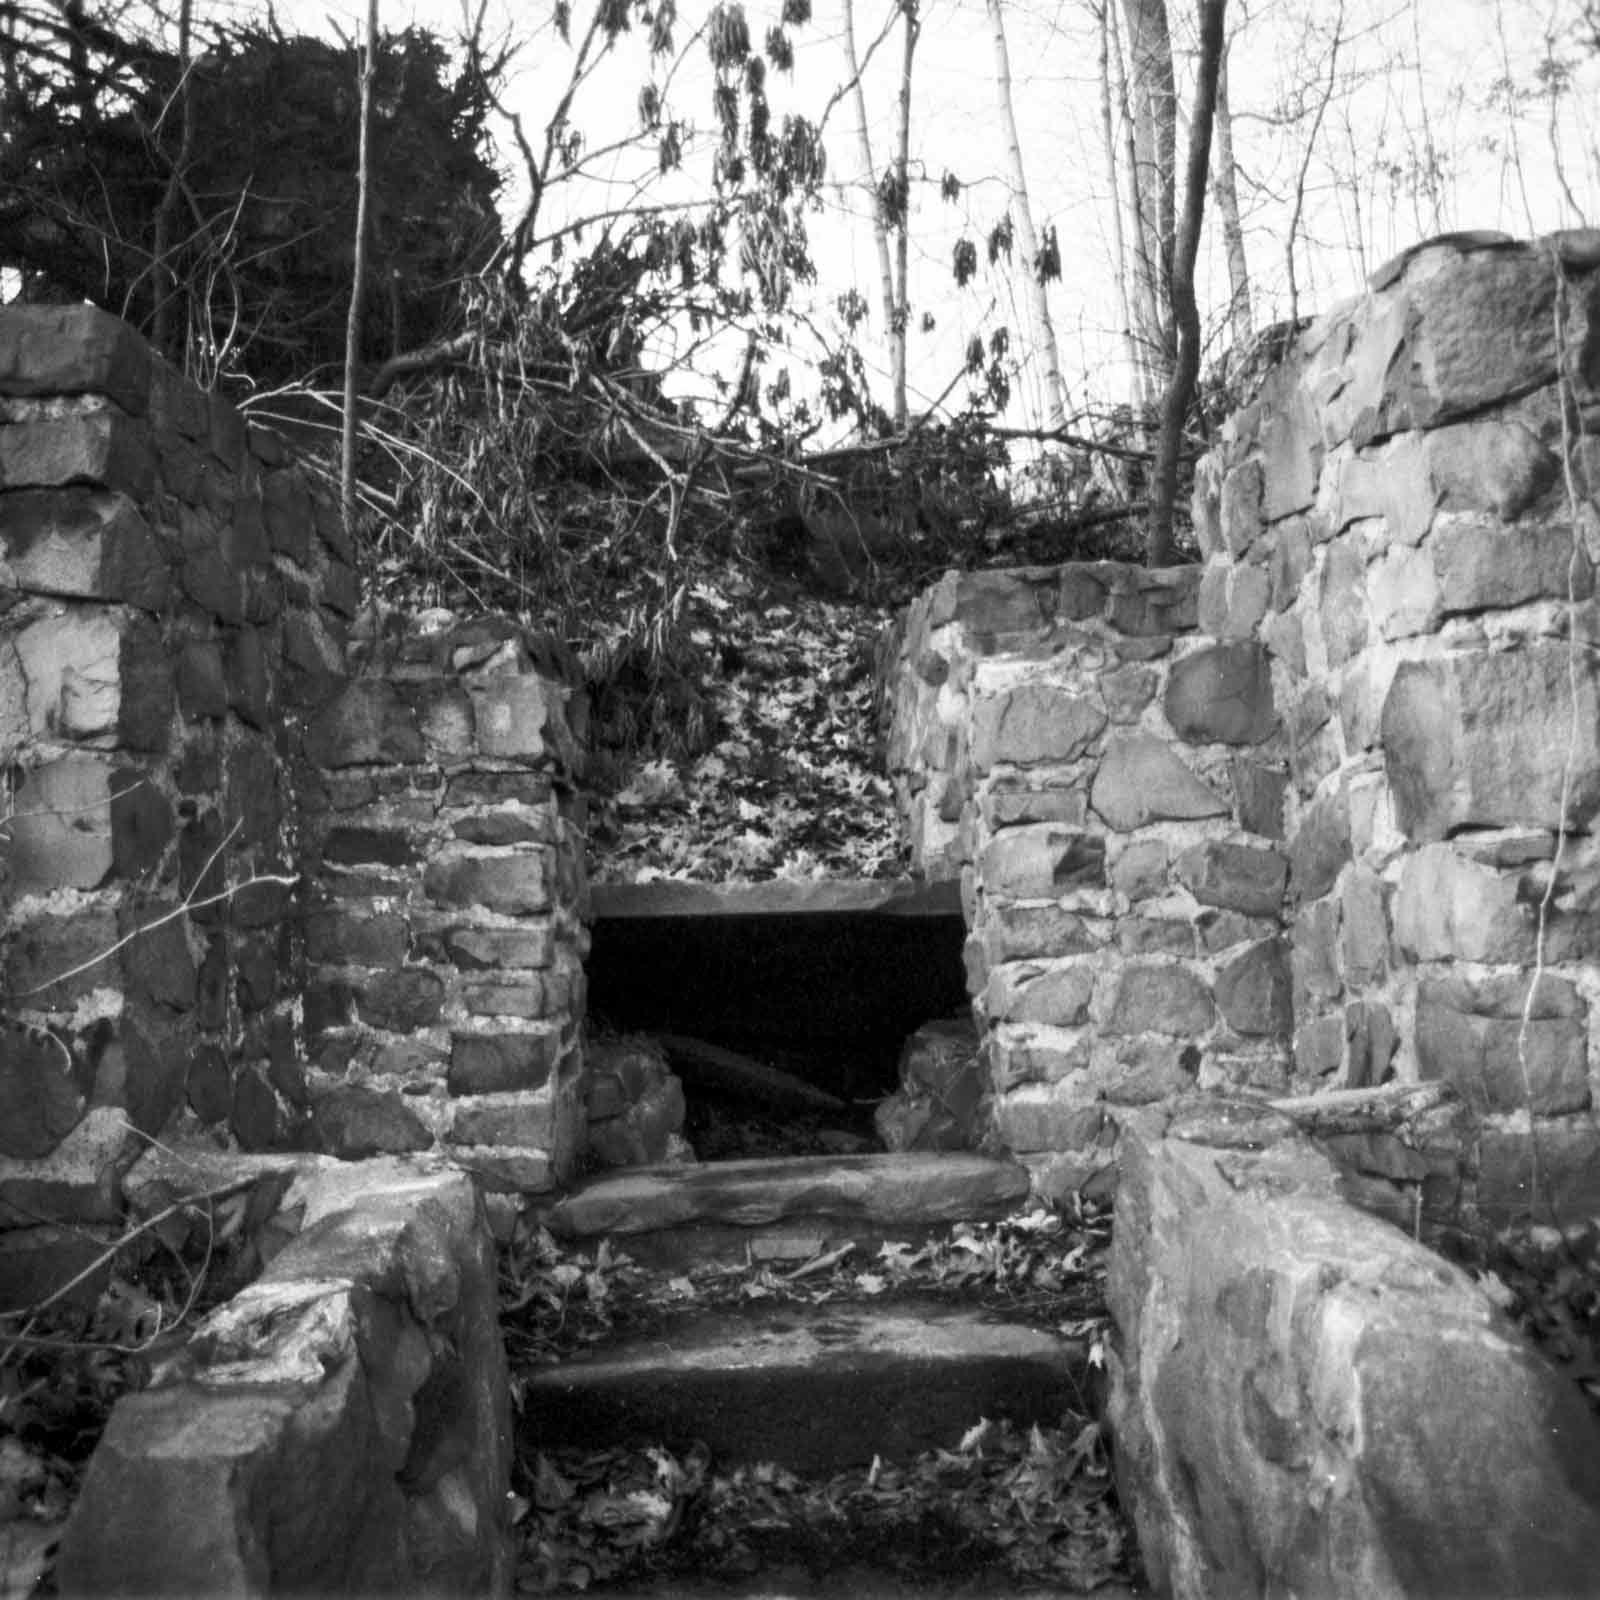 Black and white photograph of building ruins in a forest in Cedar Grove, New Jersey